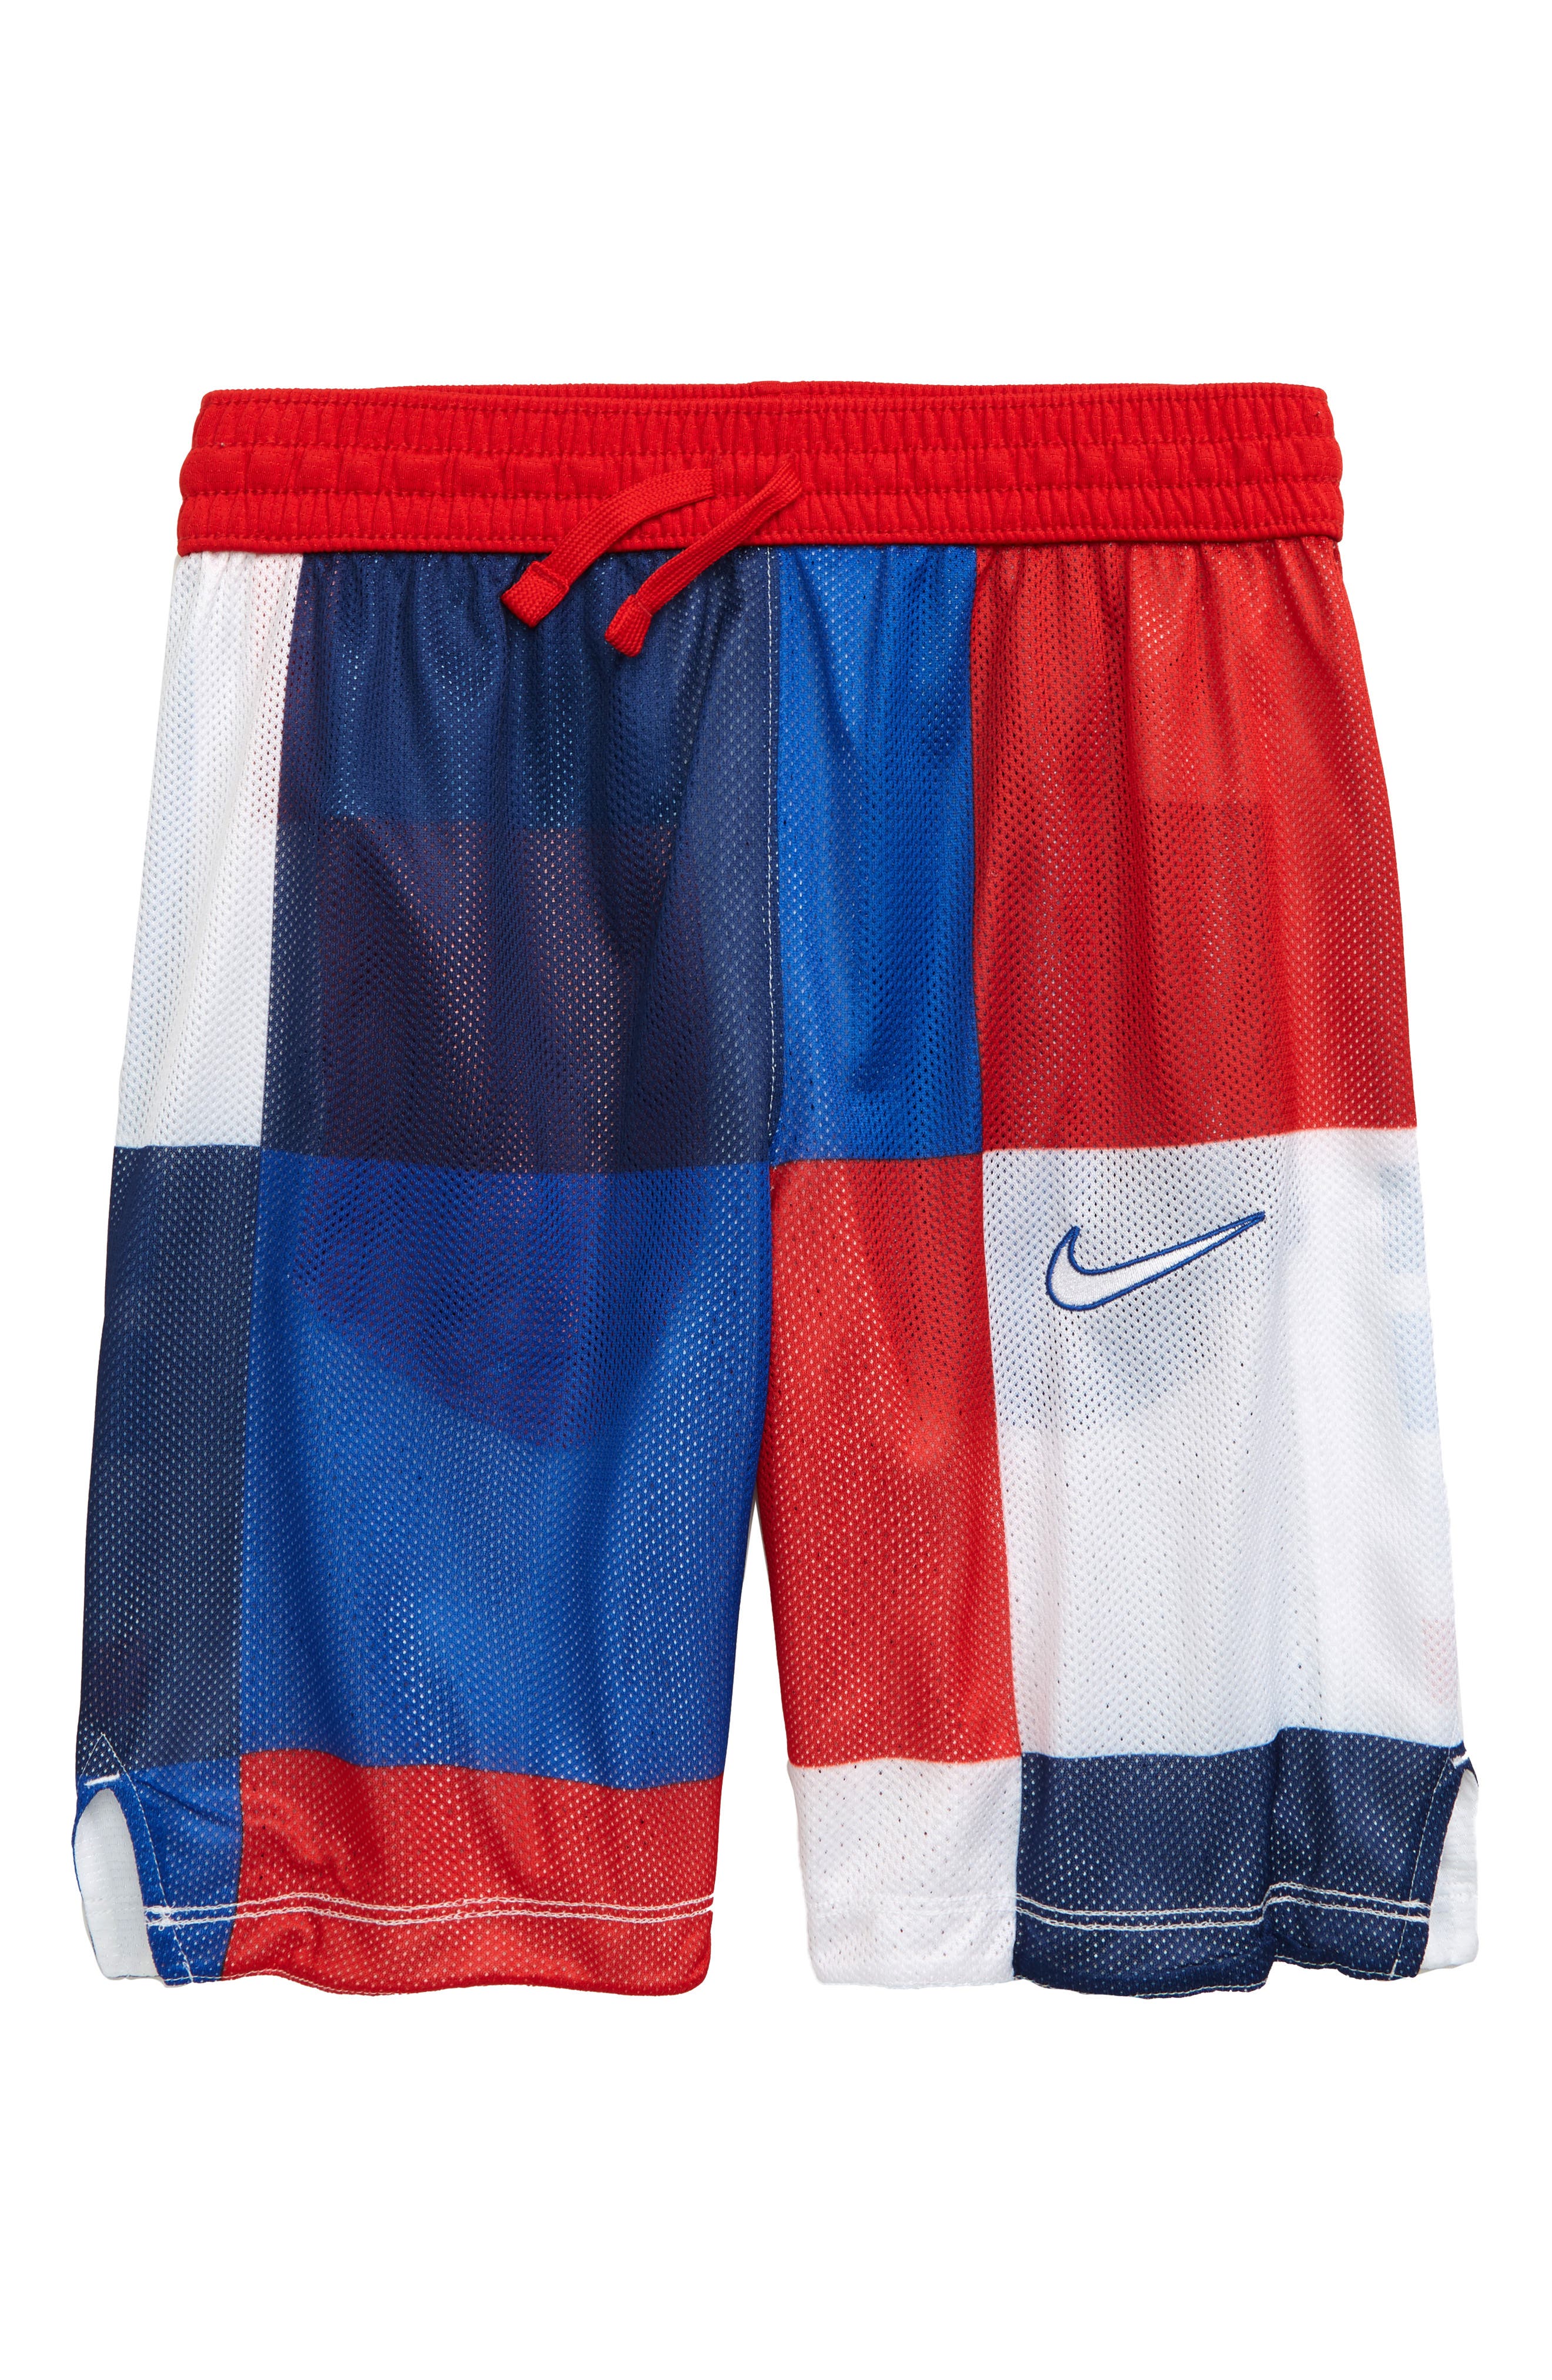 red blue and white nike shorts